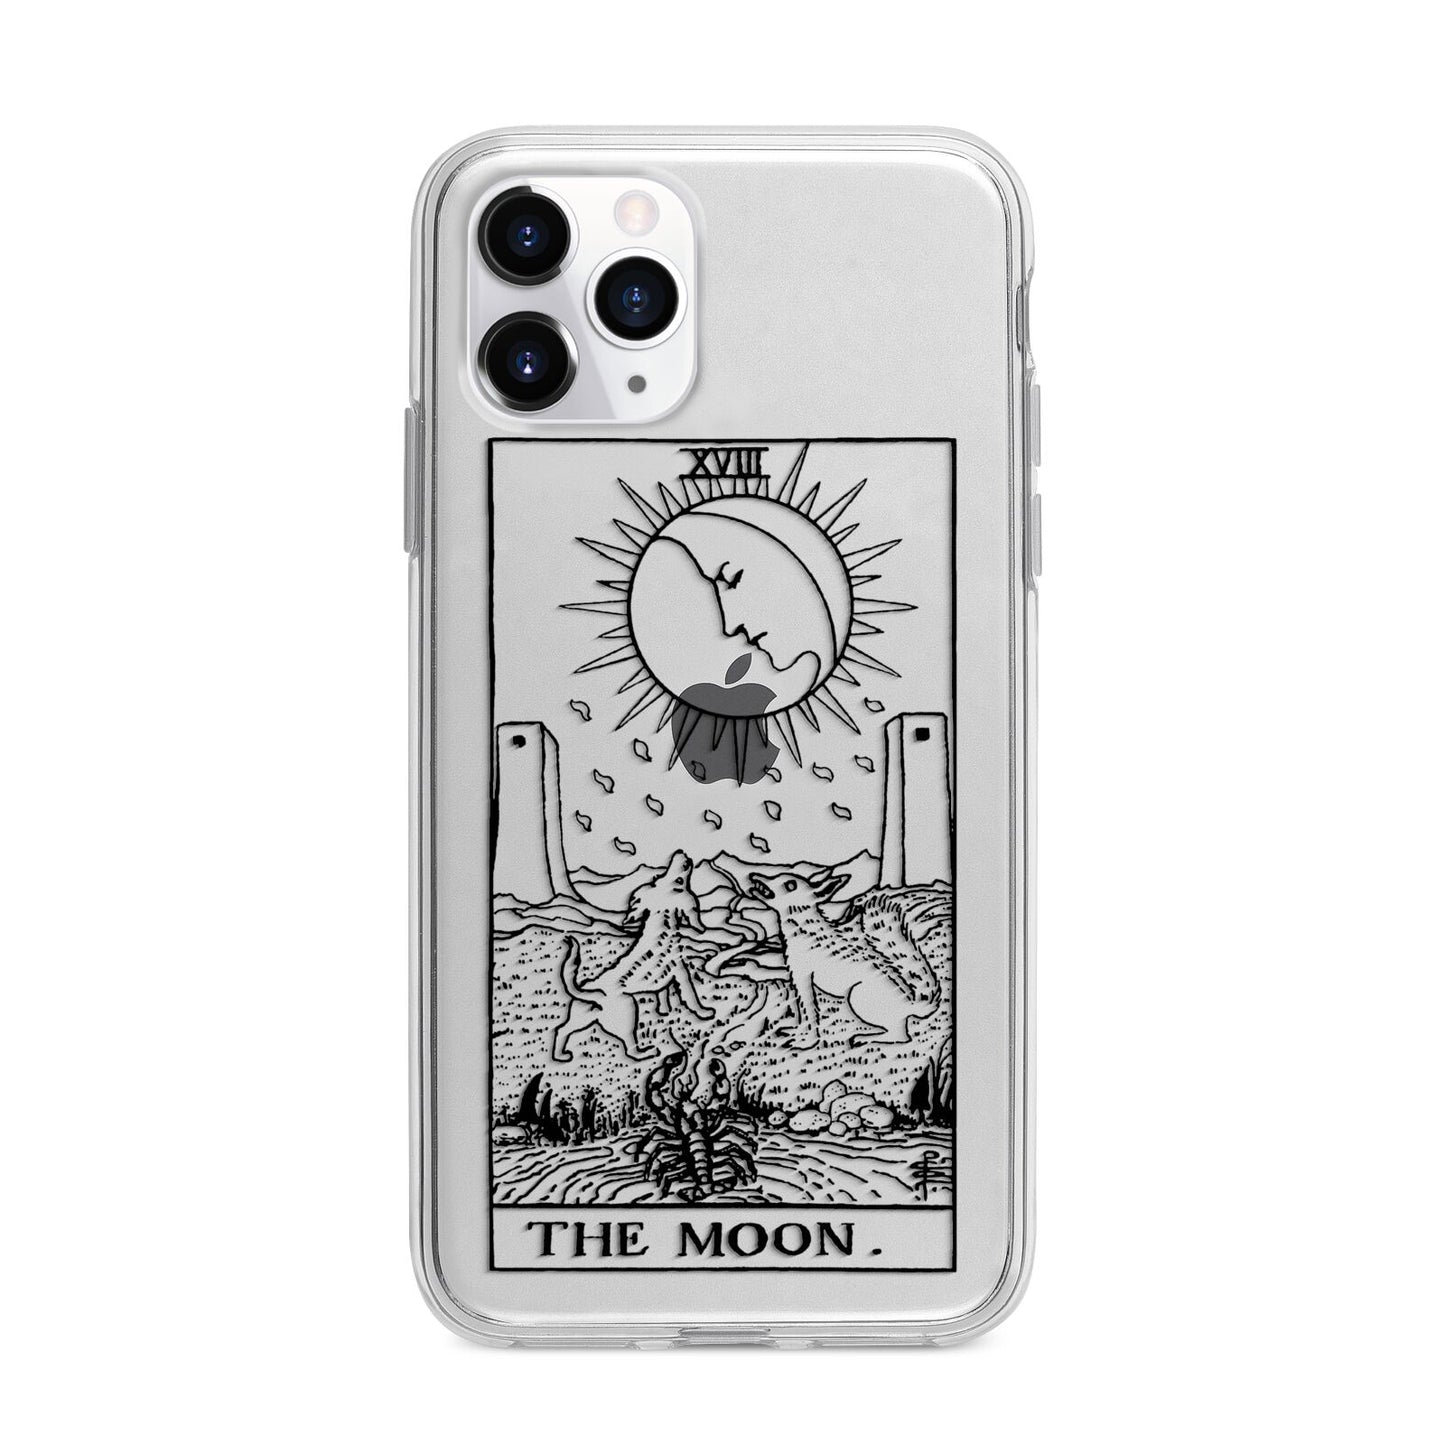 The Moon Monochrome Apple iPhone 11 Pro in Silver with Bumper Case